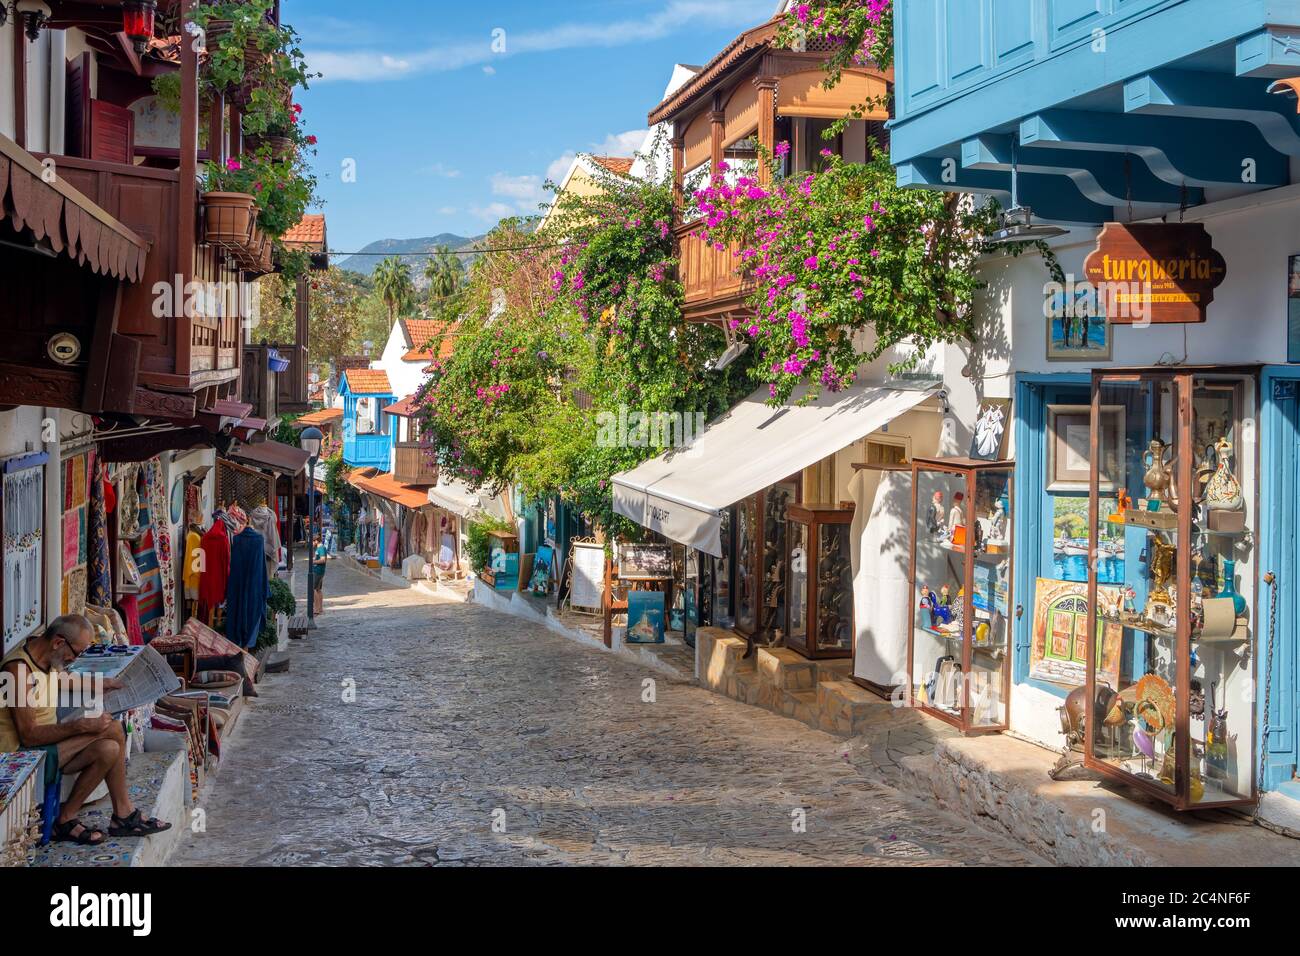 Street view in the Kas old town with boutique shops at evening, Turkey Stock Photo